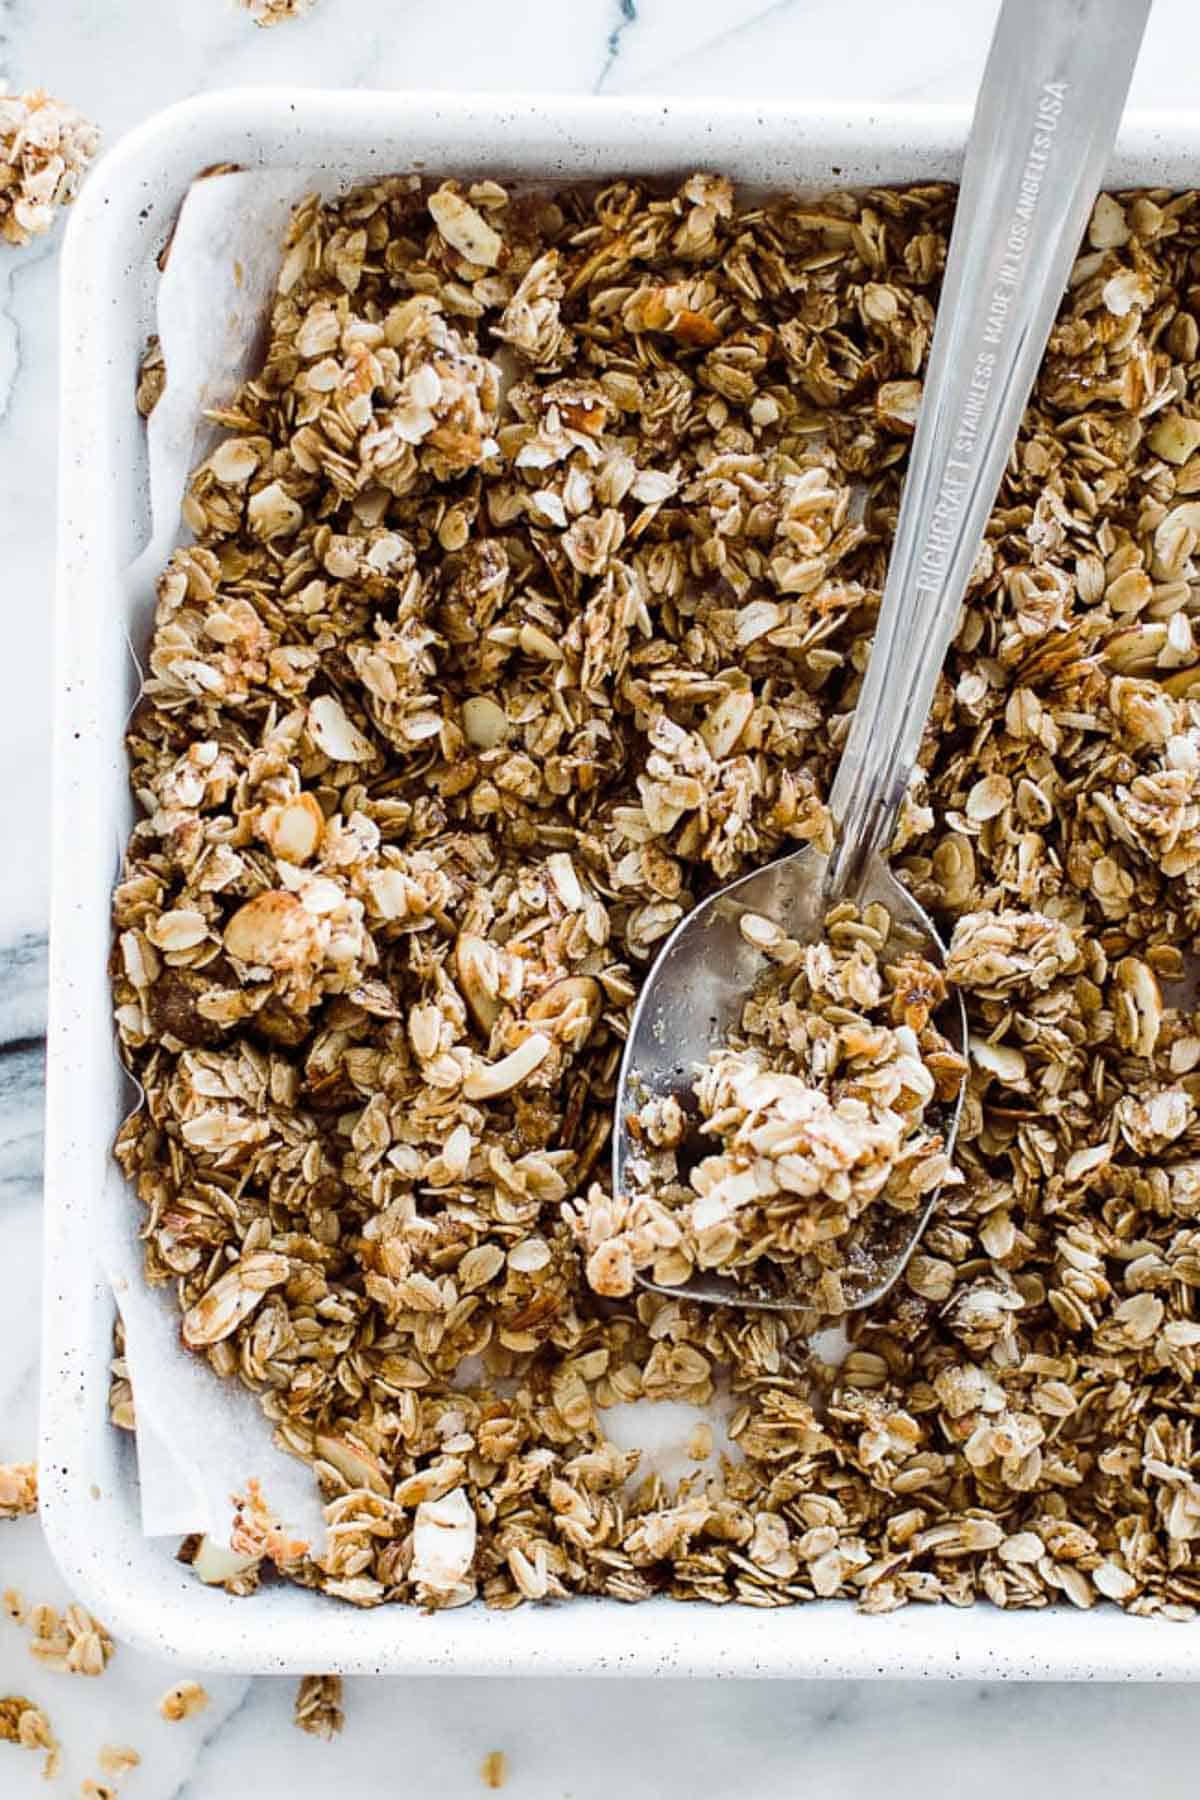 Honey granola on a jelly roll pan lined with parchment paper.